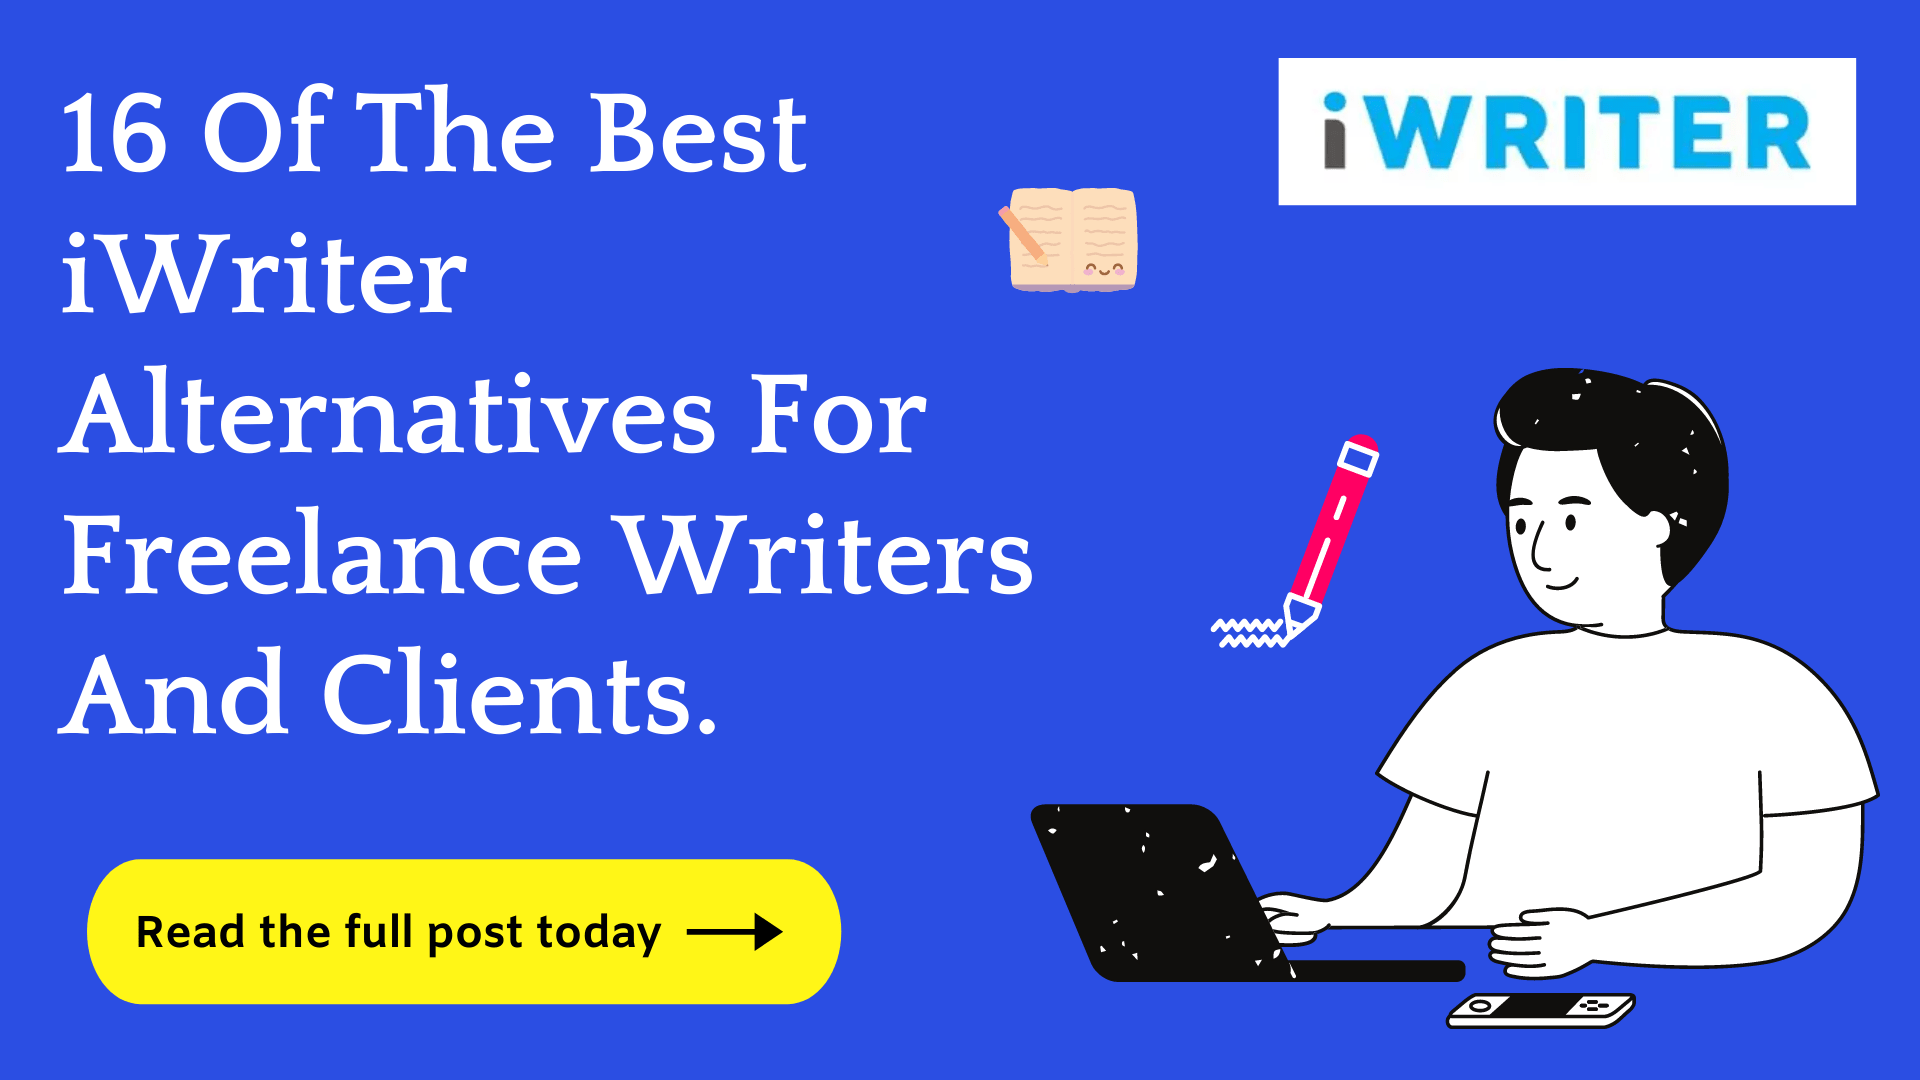 iwriter sign up